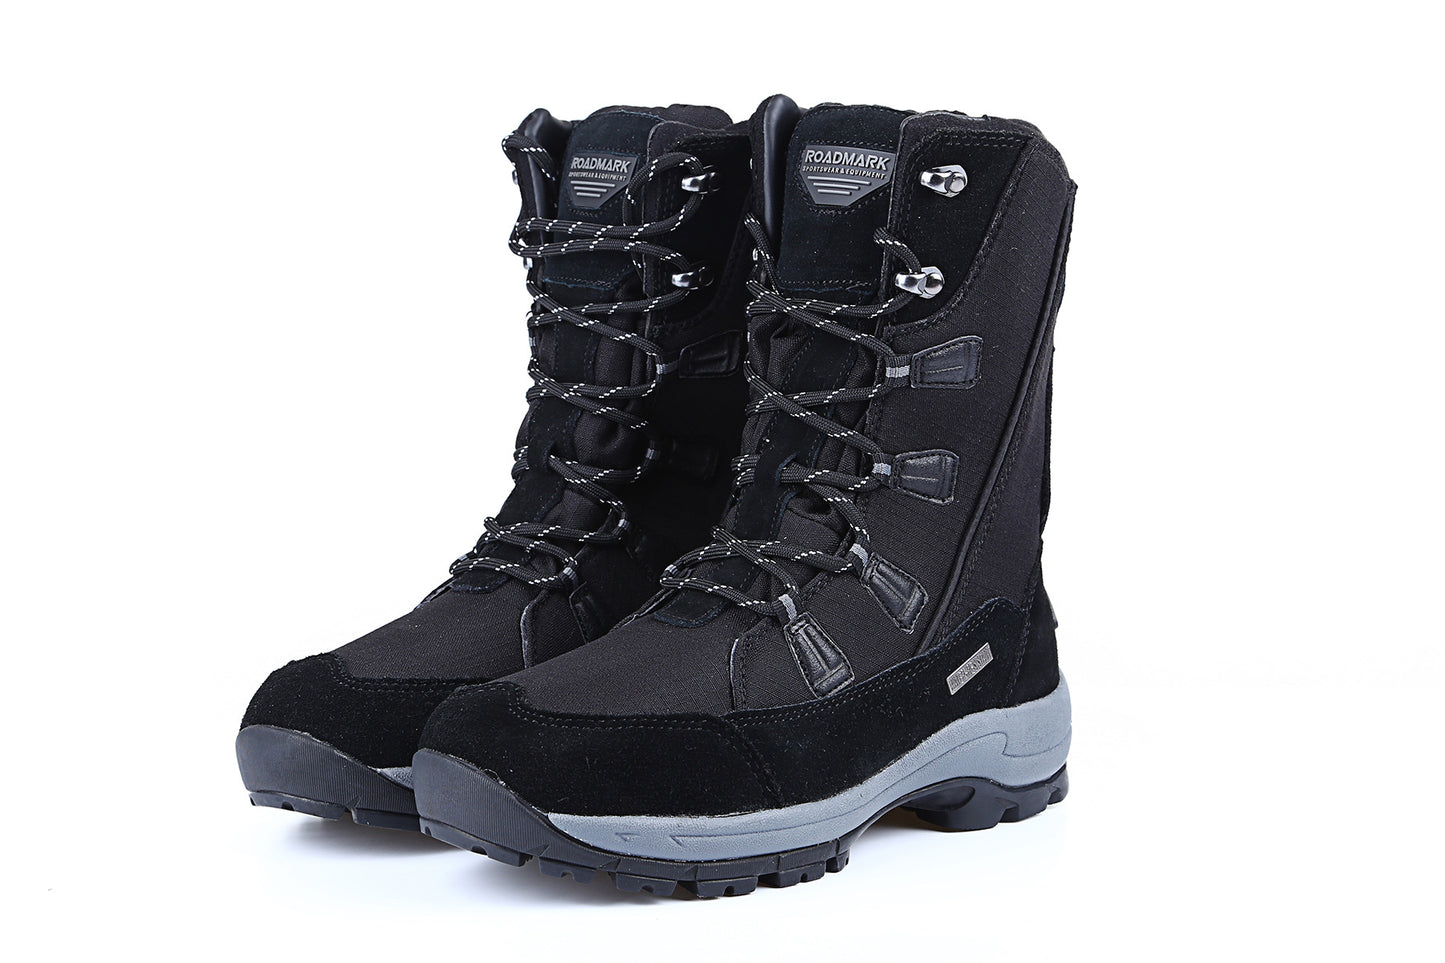 Women's Outdoor Mid-calf Length Thermal Snow Boots